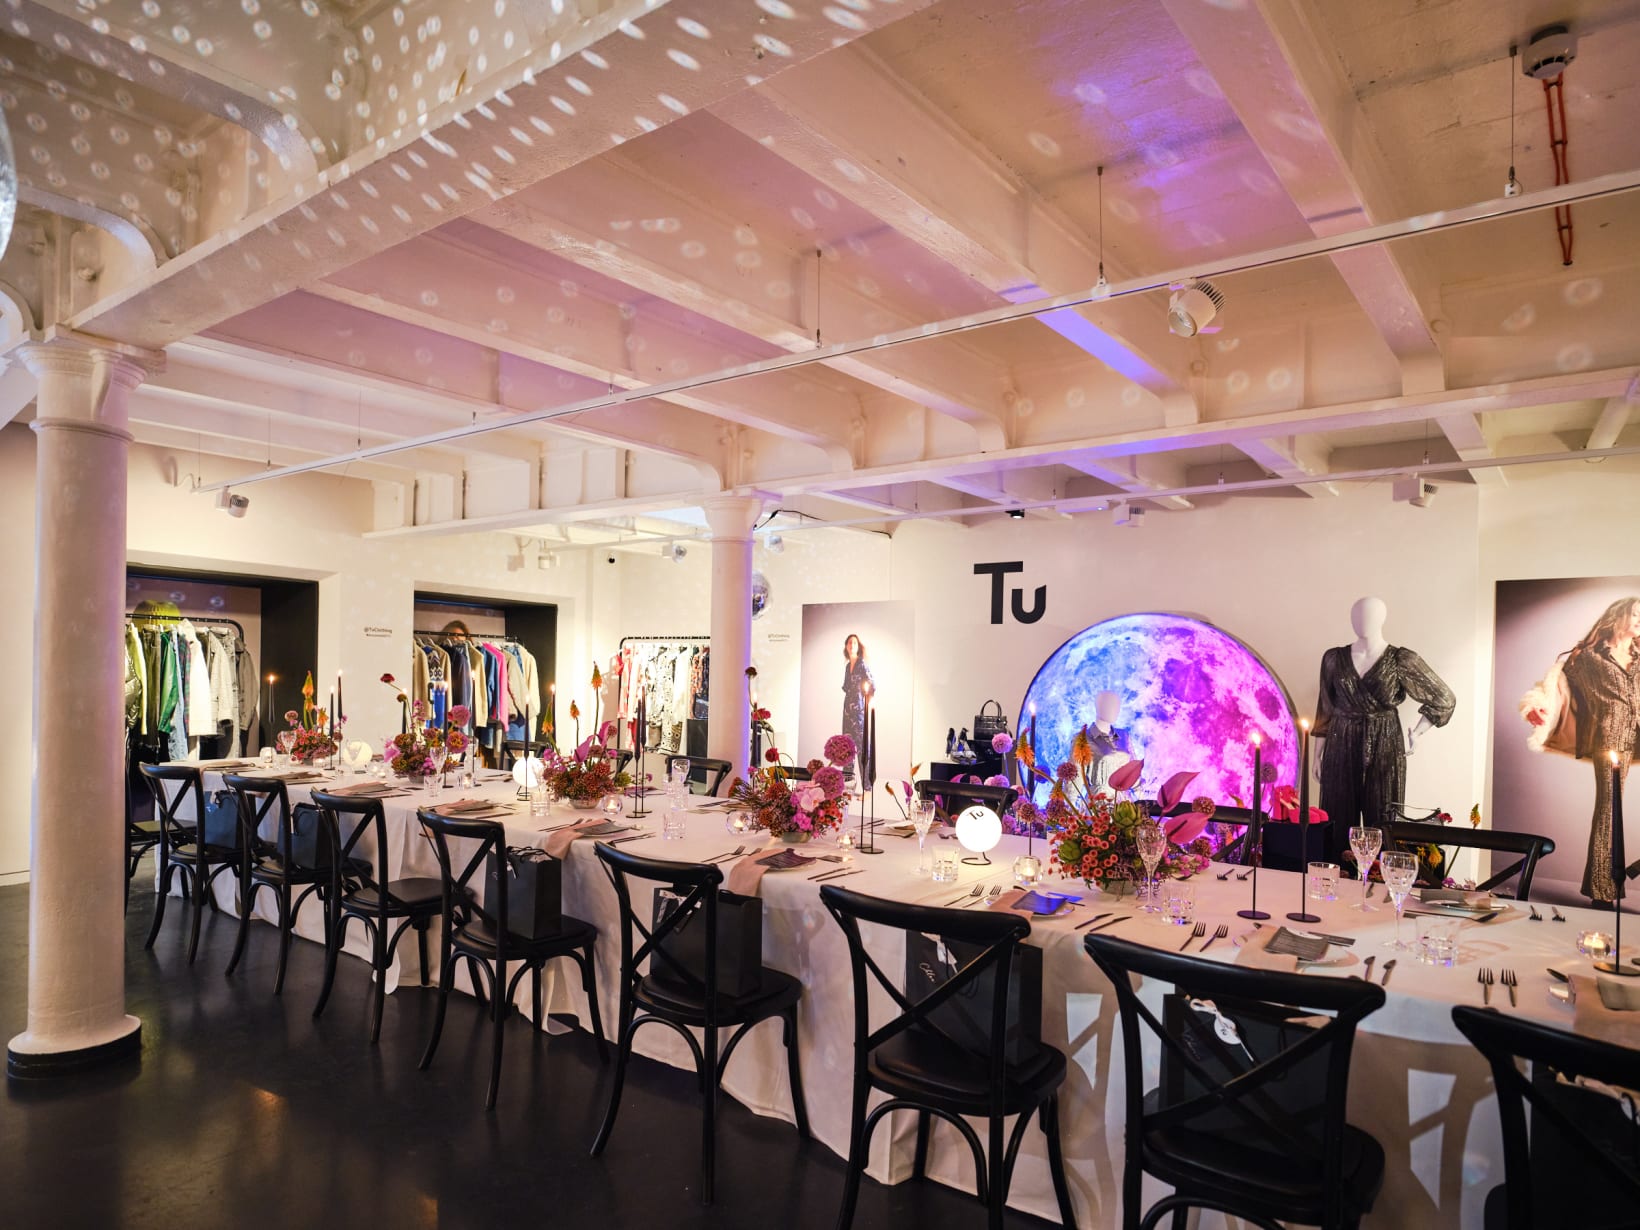 2023 Autumn Fashion Showcase at the Stabels organised by Look Left, accompanied by a 3-course dinner catered by The Social...